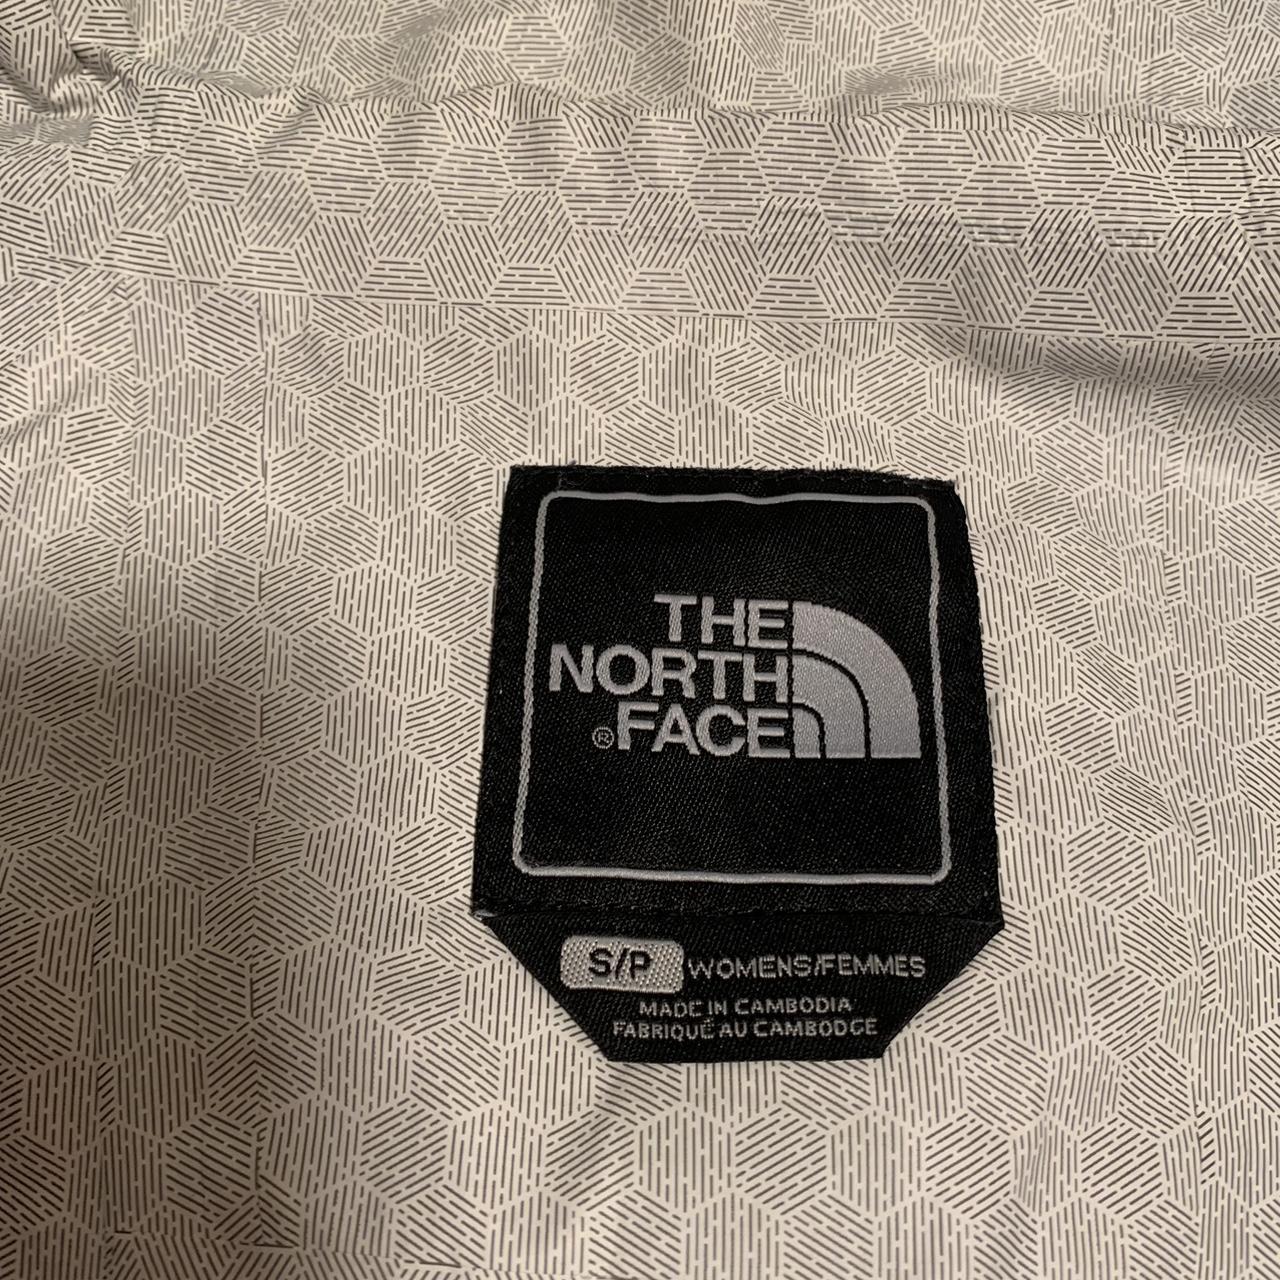 The North Face Women's Grey Jacket (3)